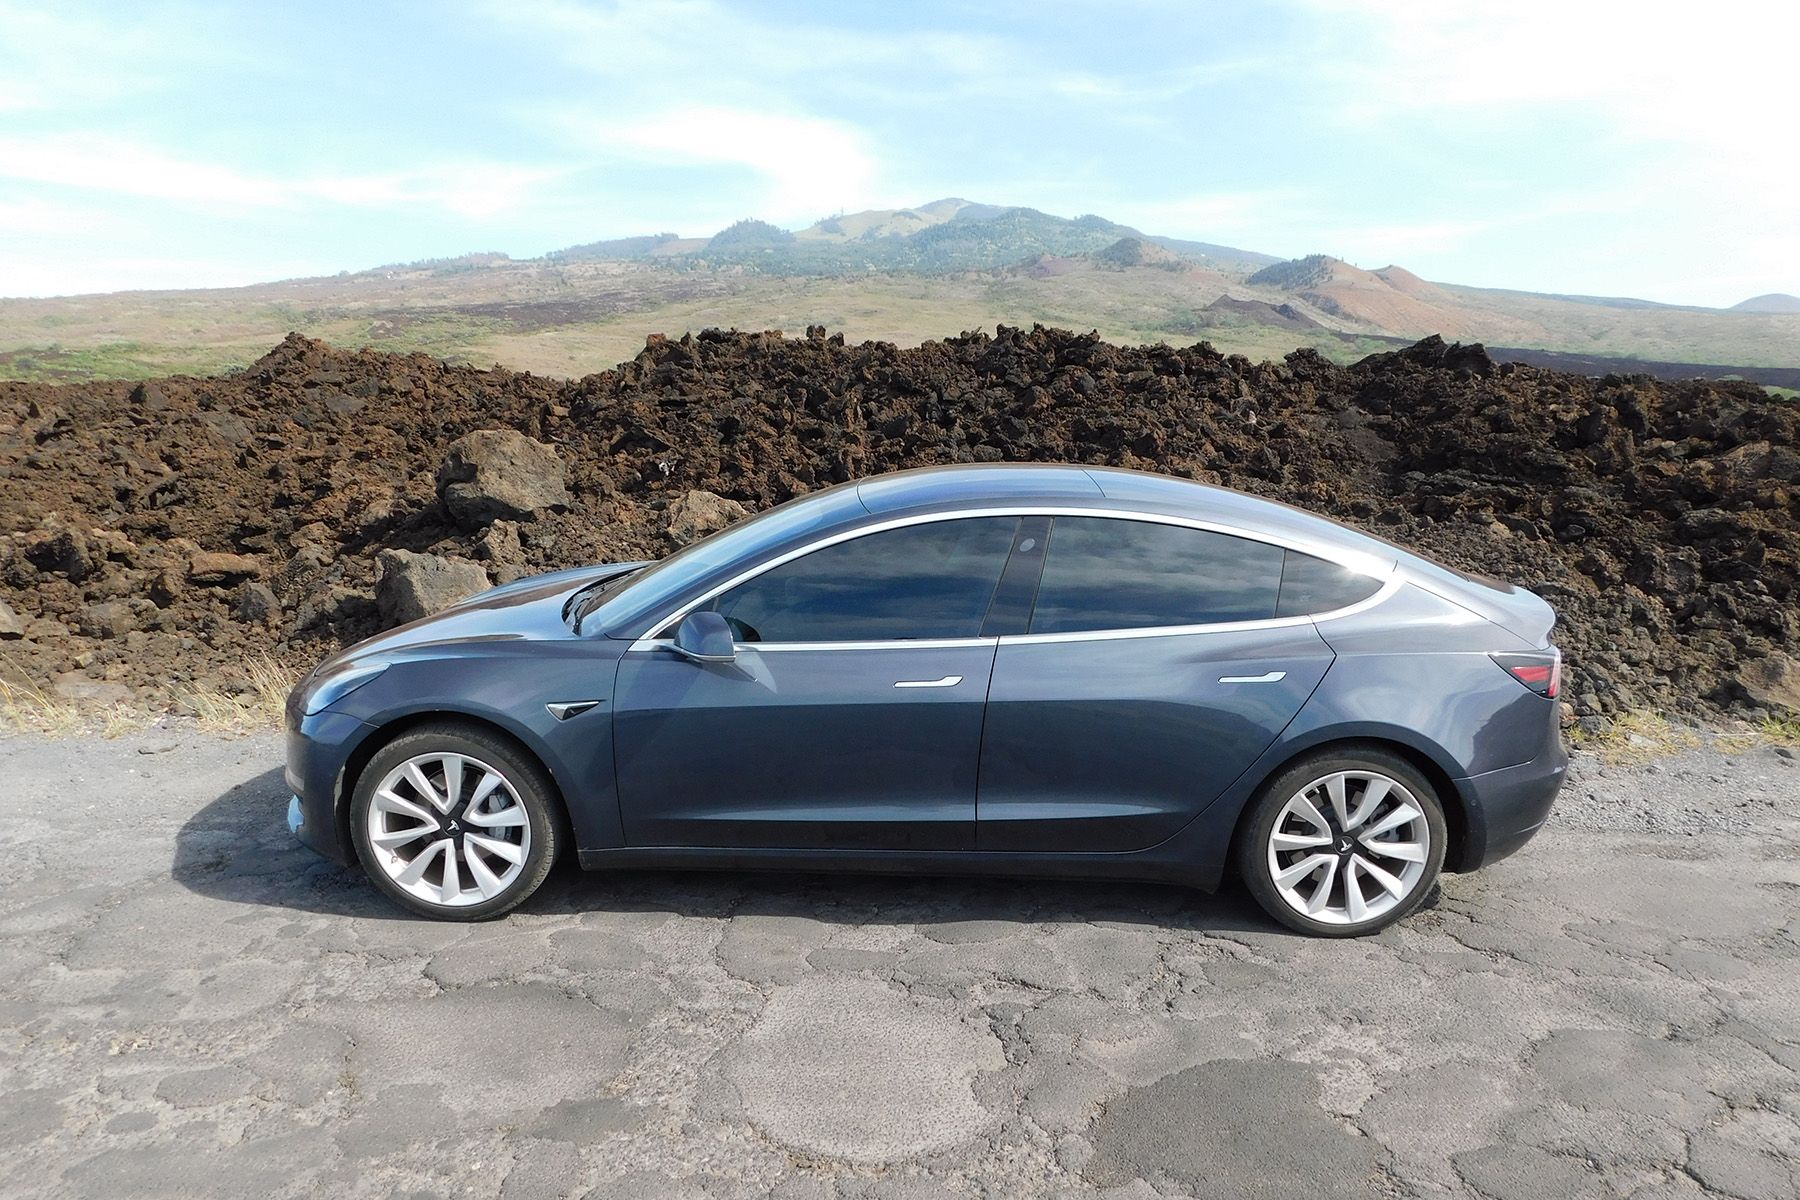 Some early Tesla Model 3 Highland owners aren't very happy with Tesla  Vision